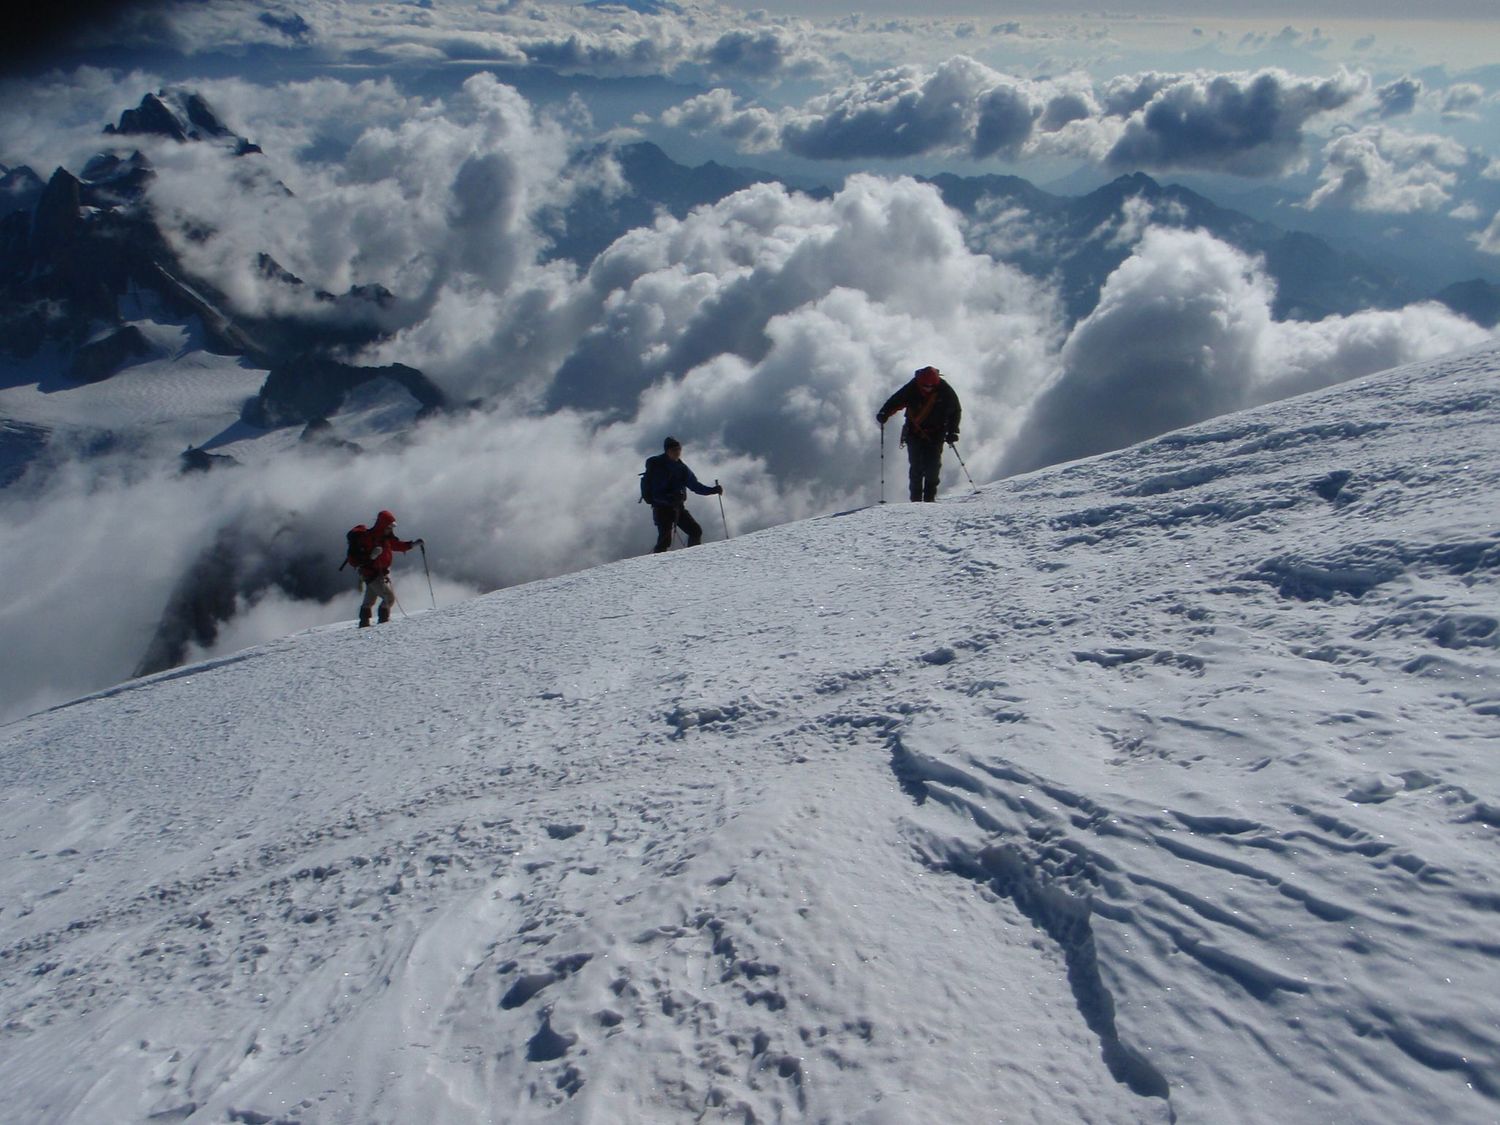  Looking towards Italy on the approach to the summit of Mont Blanc 